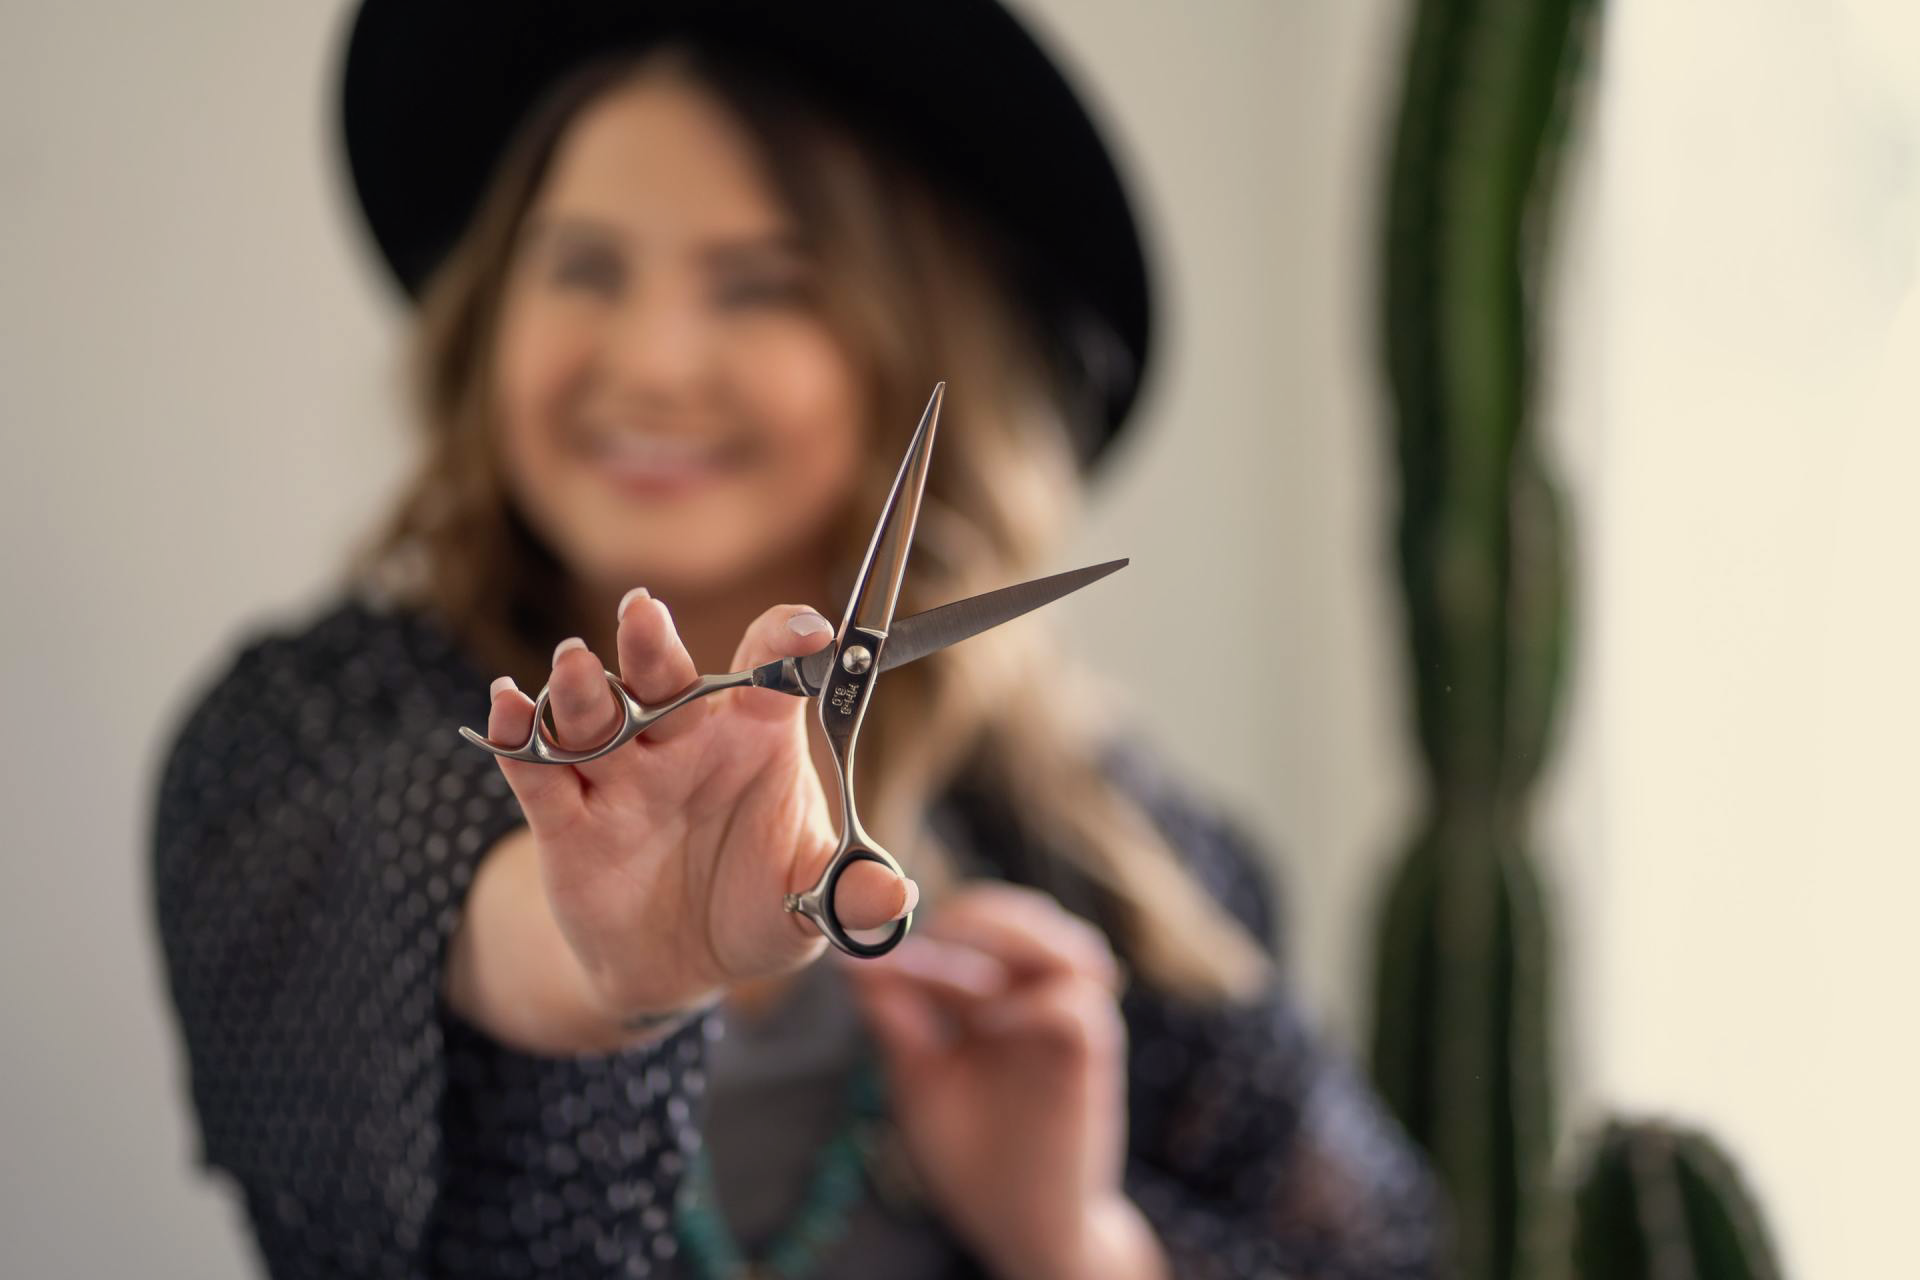 Lady wearing a hat holding a pair of scissors